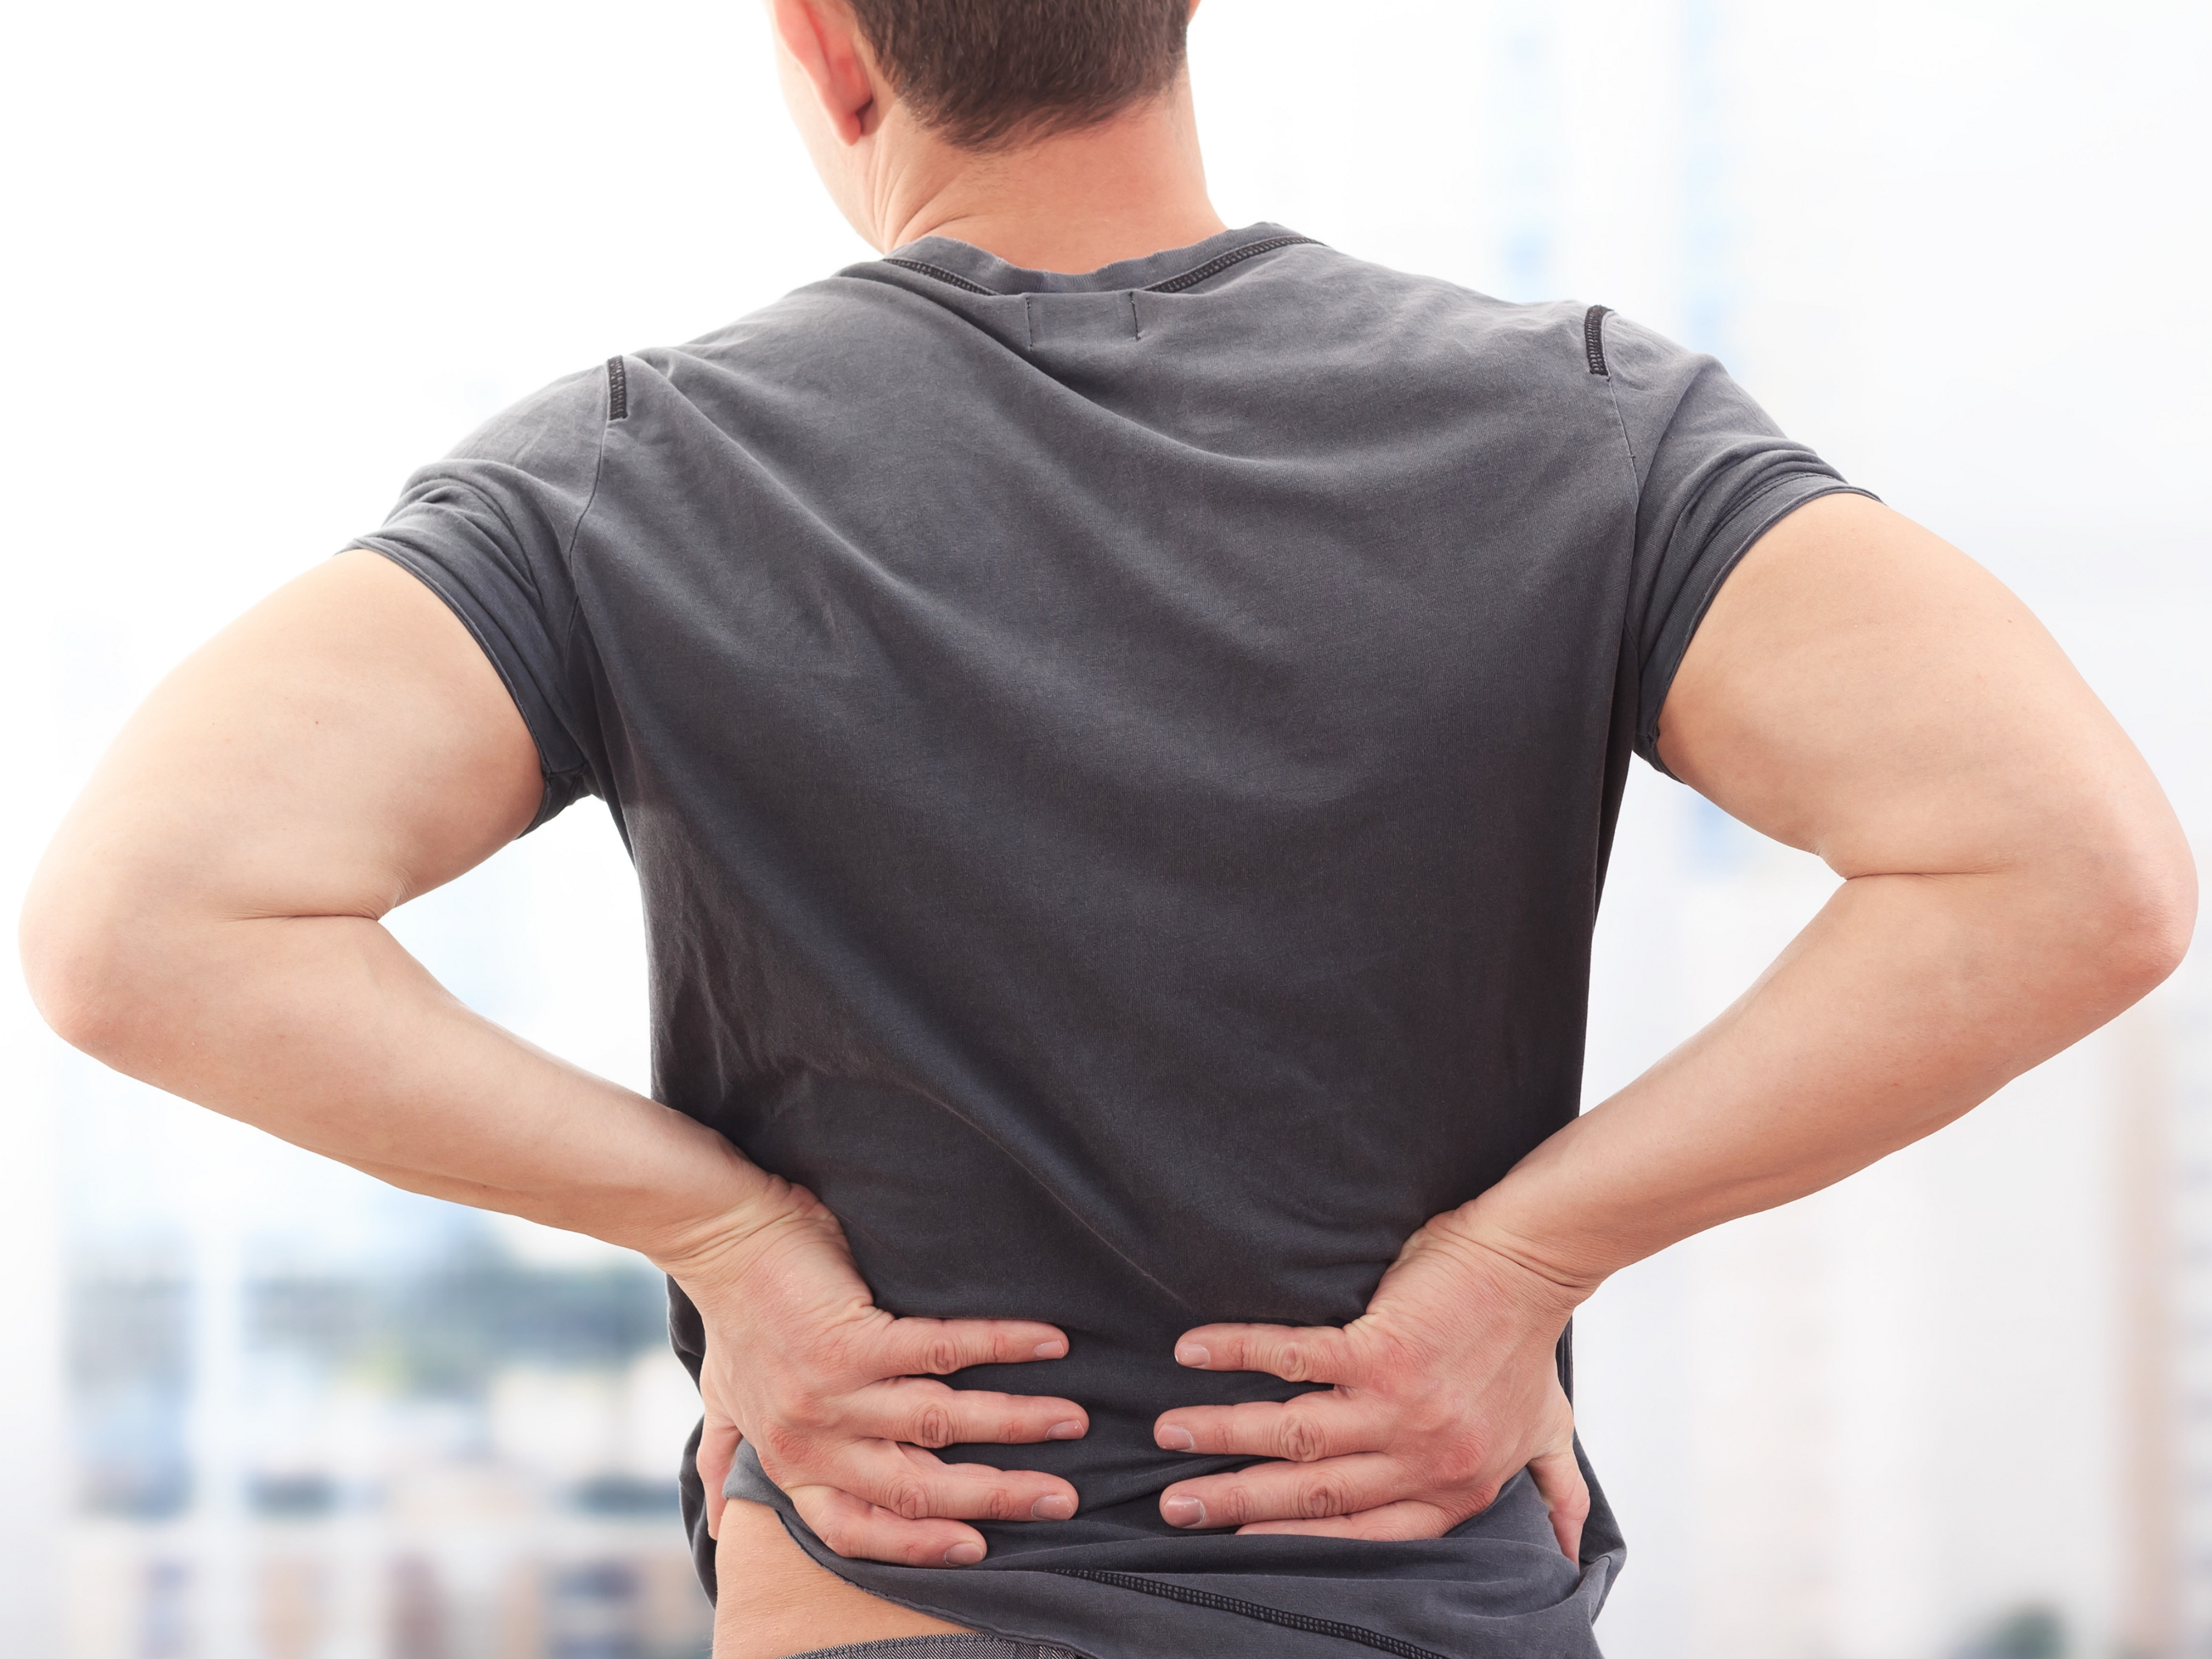 The best exercises for low back pain.